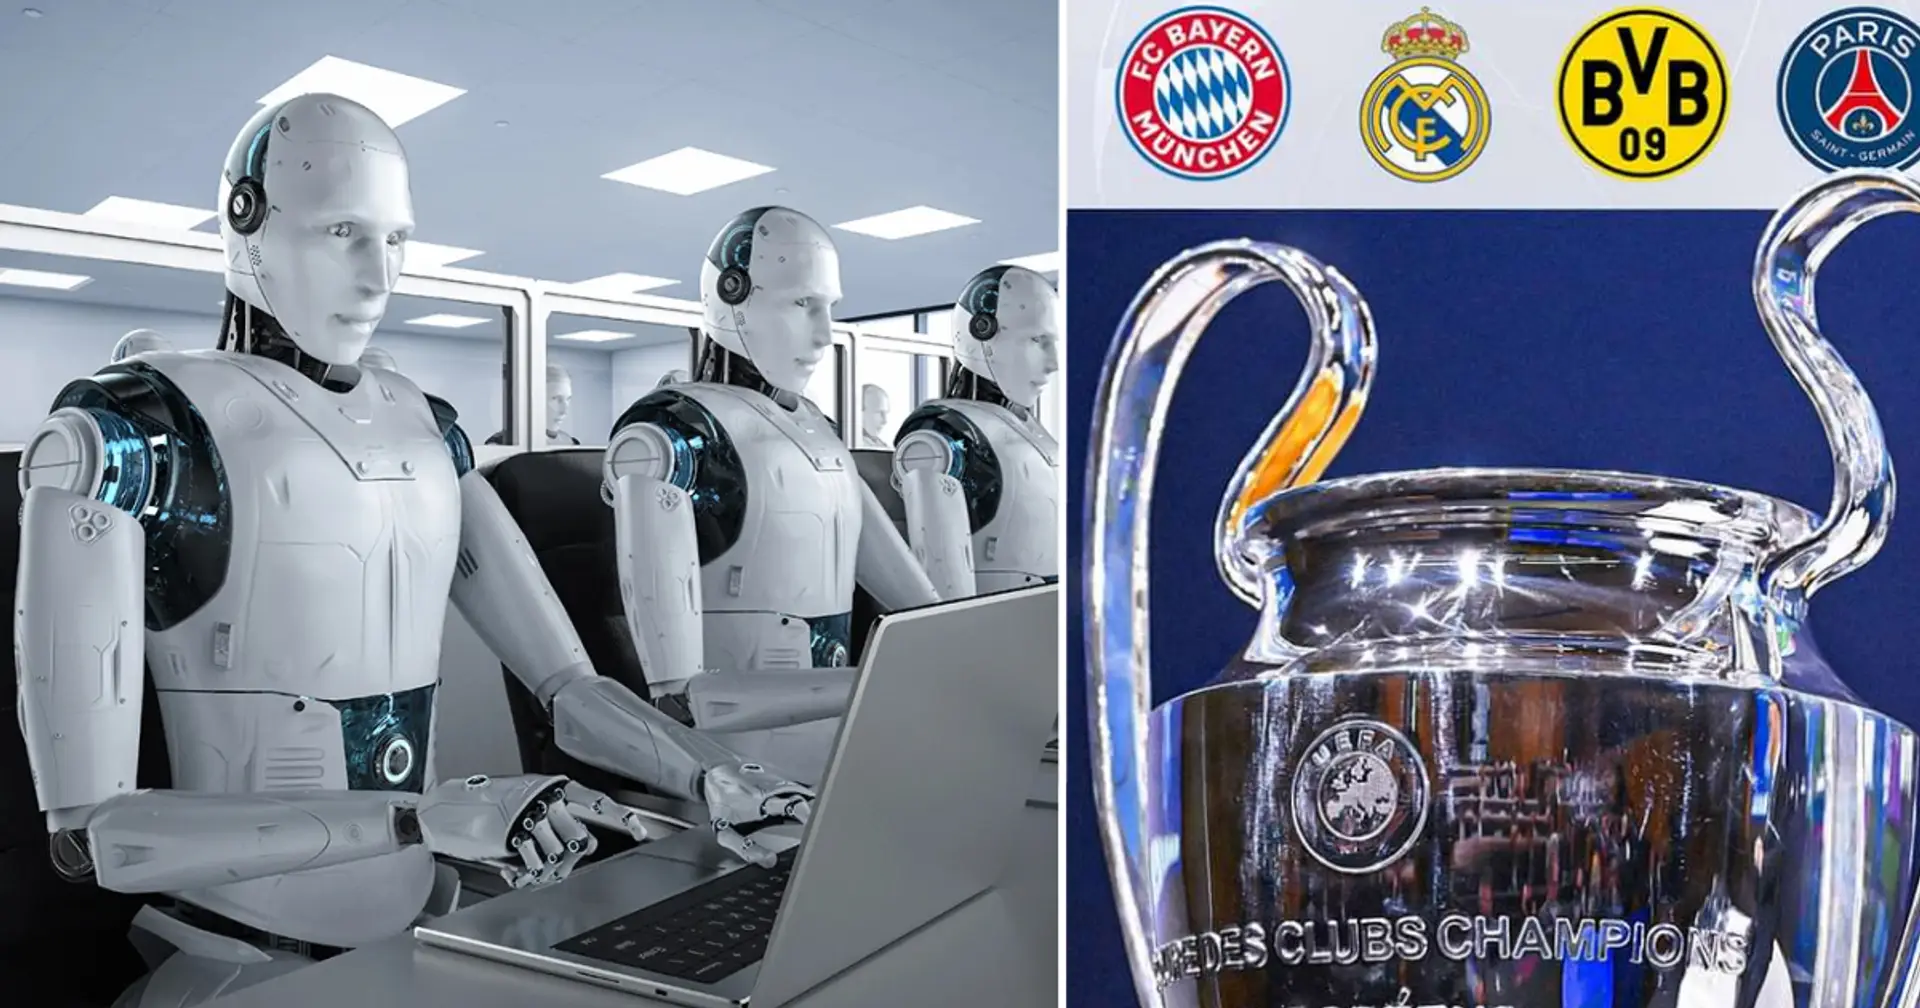 Supercomputer unveils new favourites to win Champions League after quarter-final